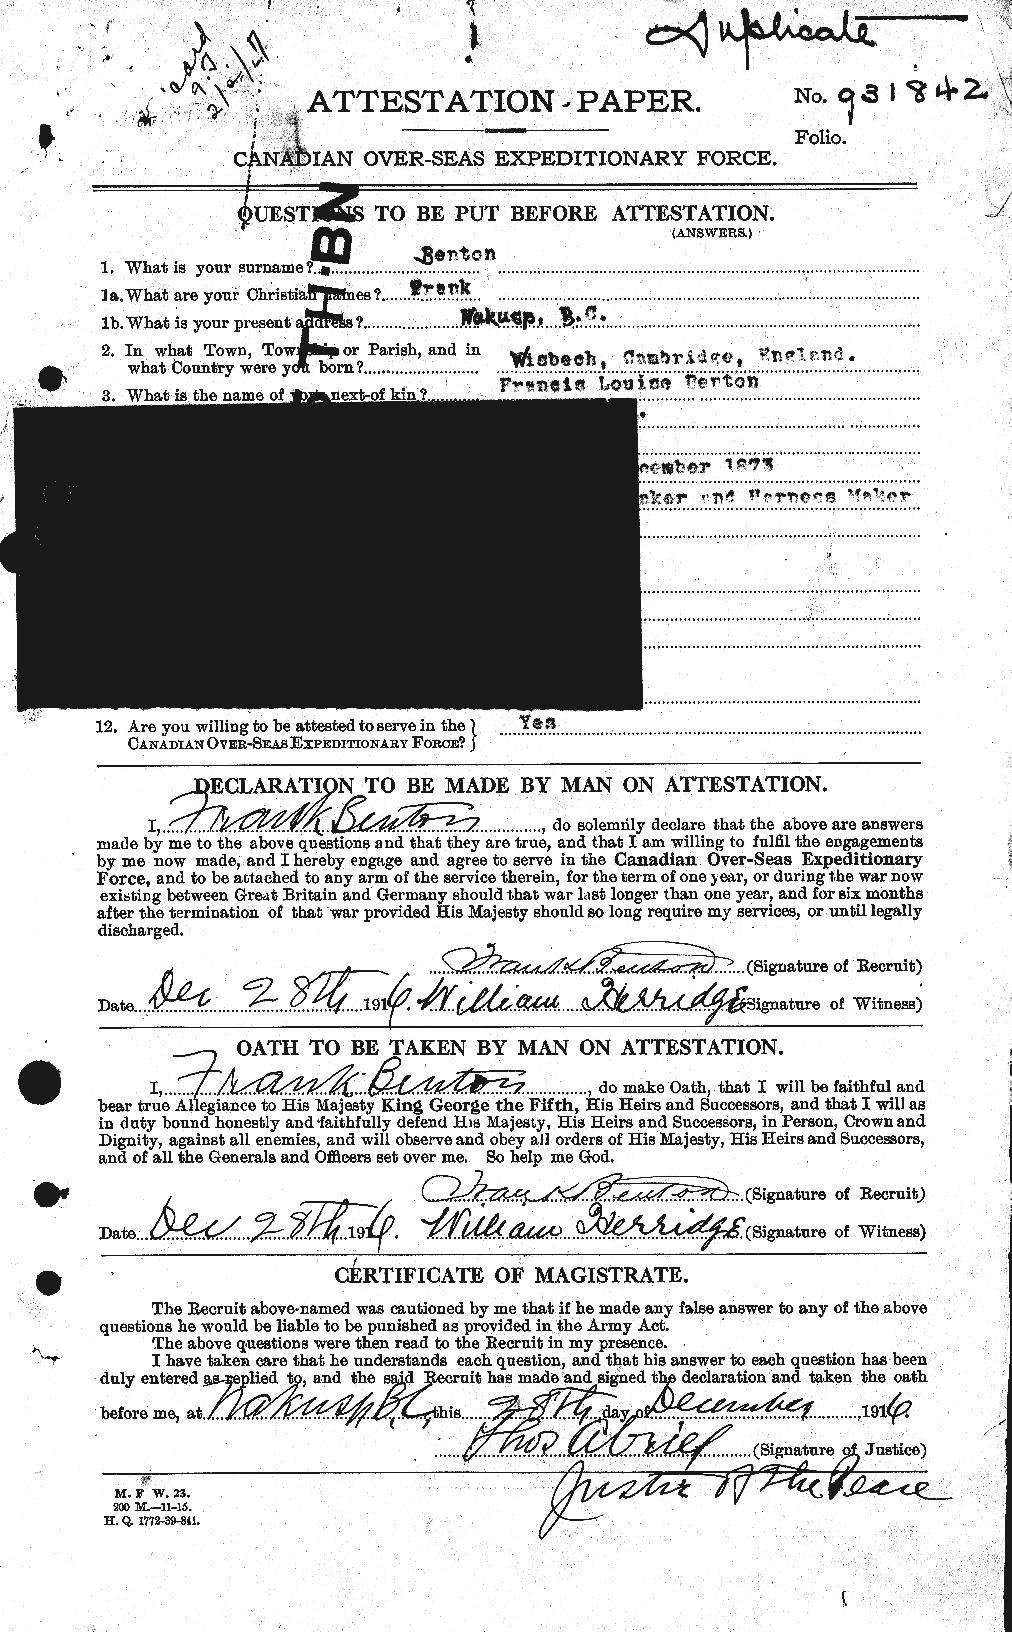 Personnel Records of the First World War - CEF 237809a